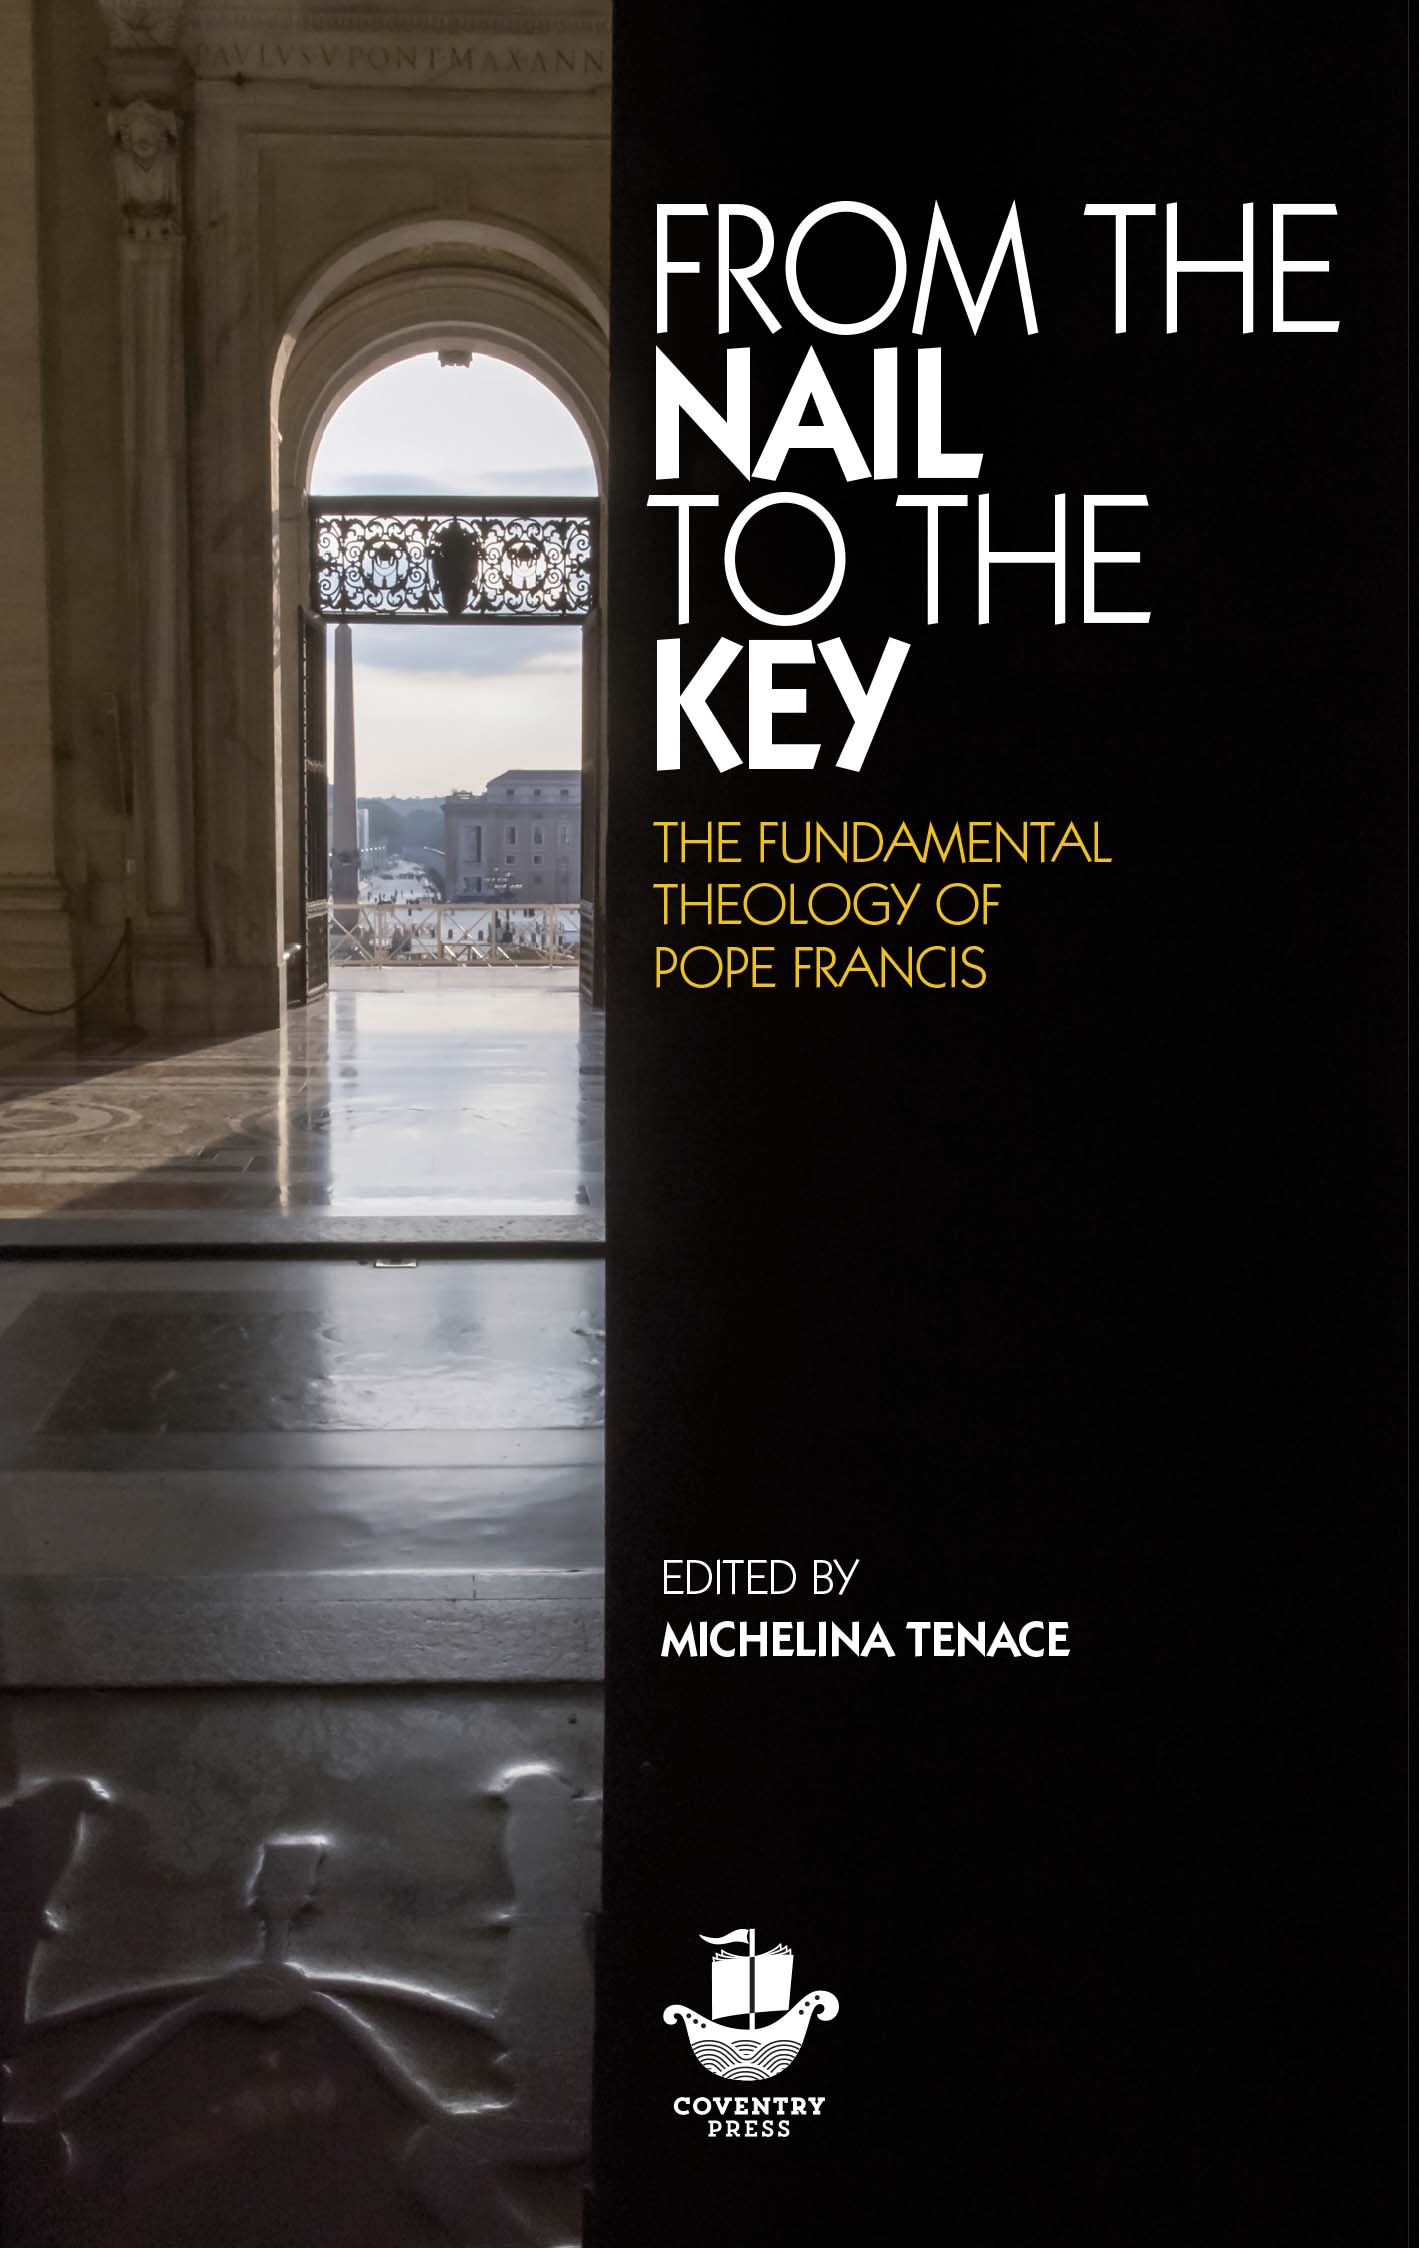 From the Nail to the Key  The Fundamental Theology of Pope Francis / Edited by Michelina Tenace